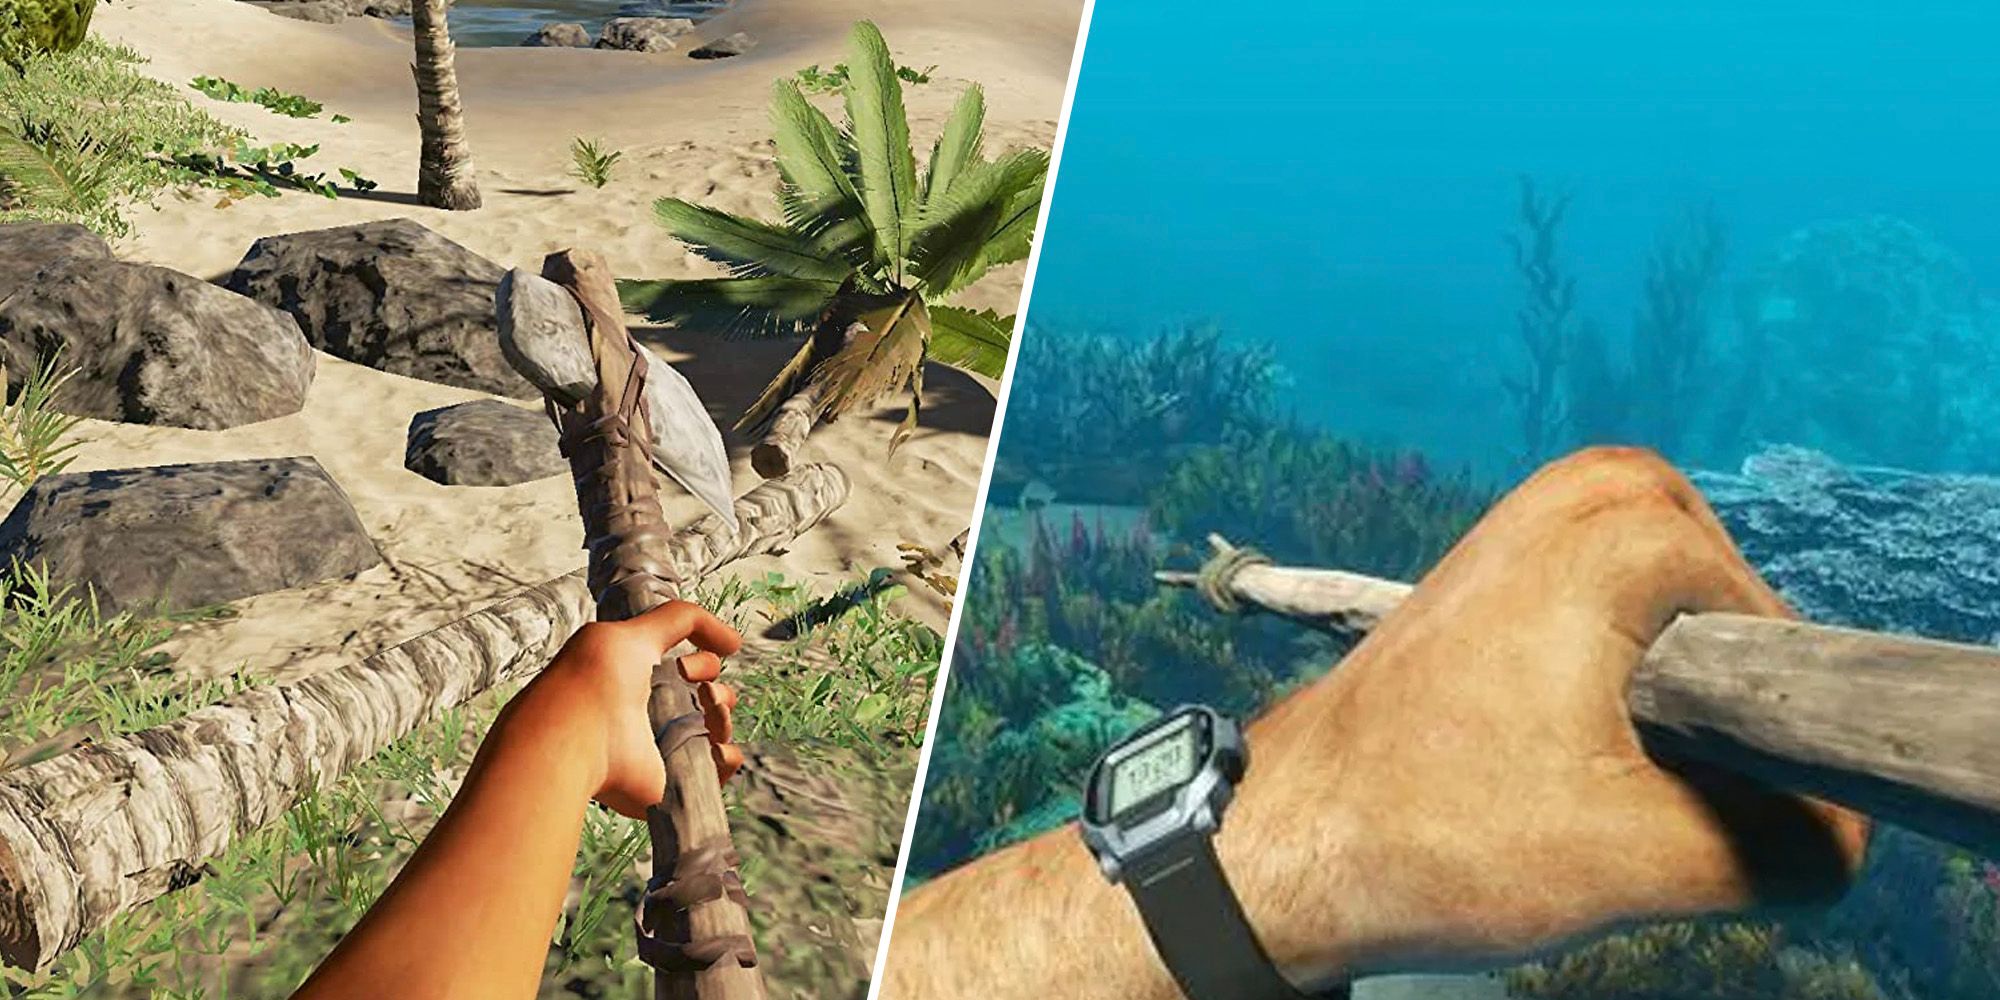 refined hammer and fishing spear in stranded deep